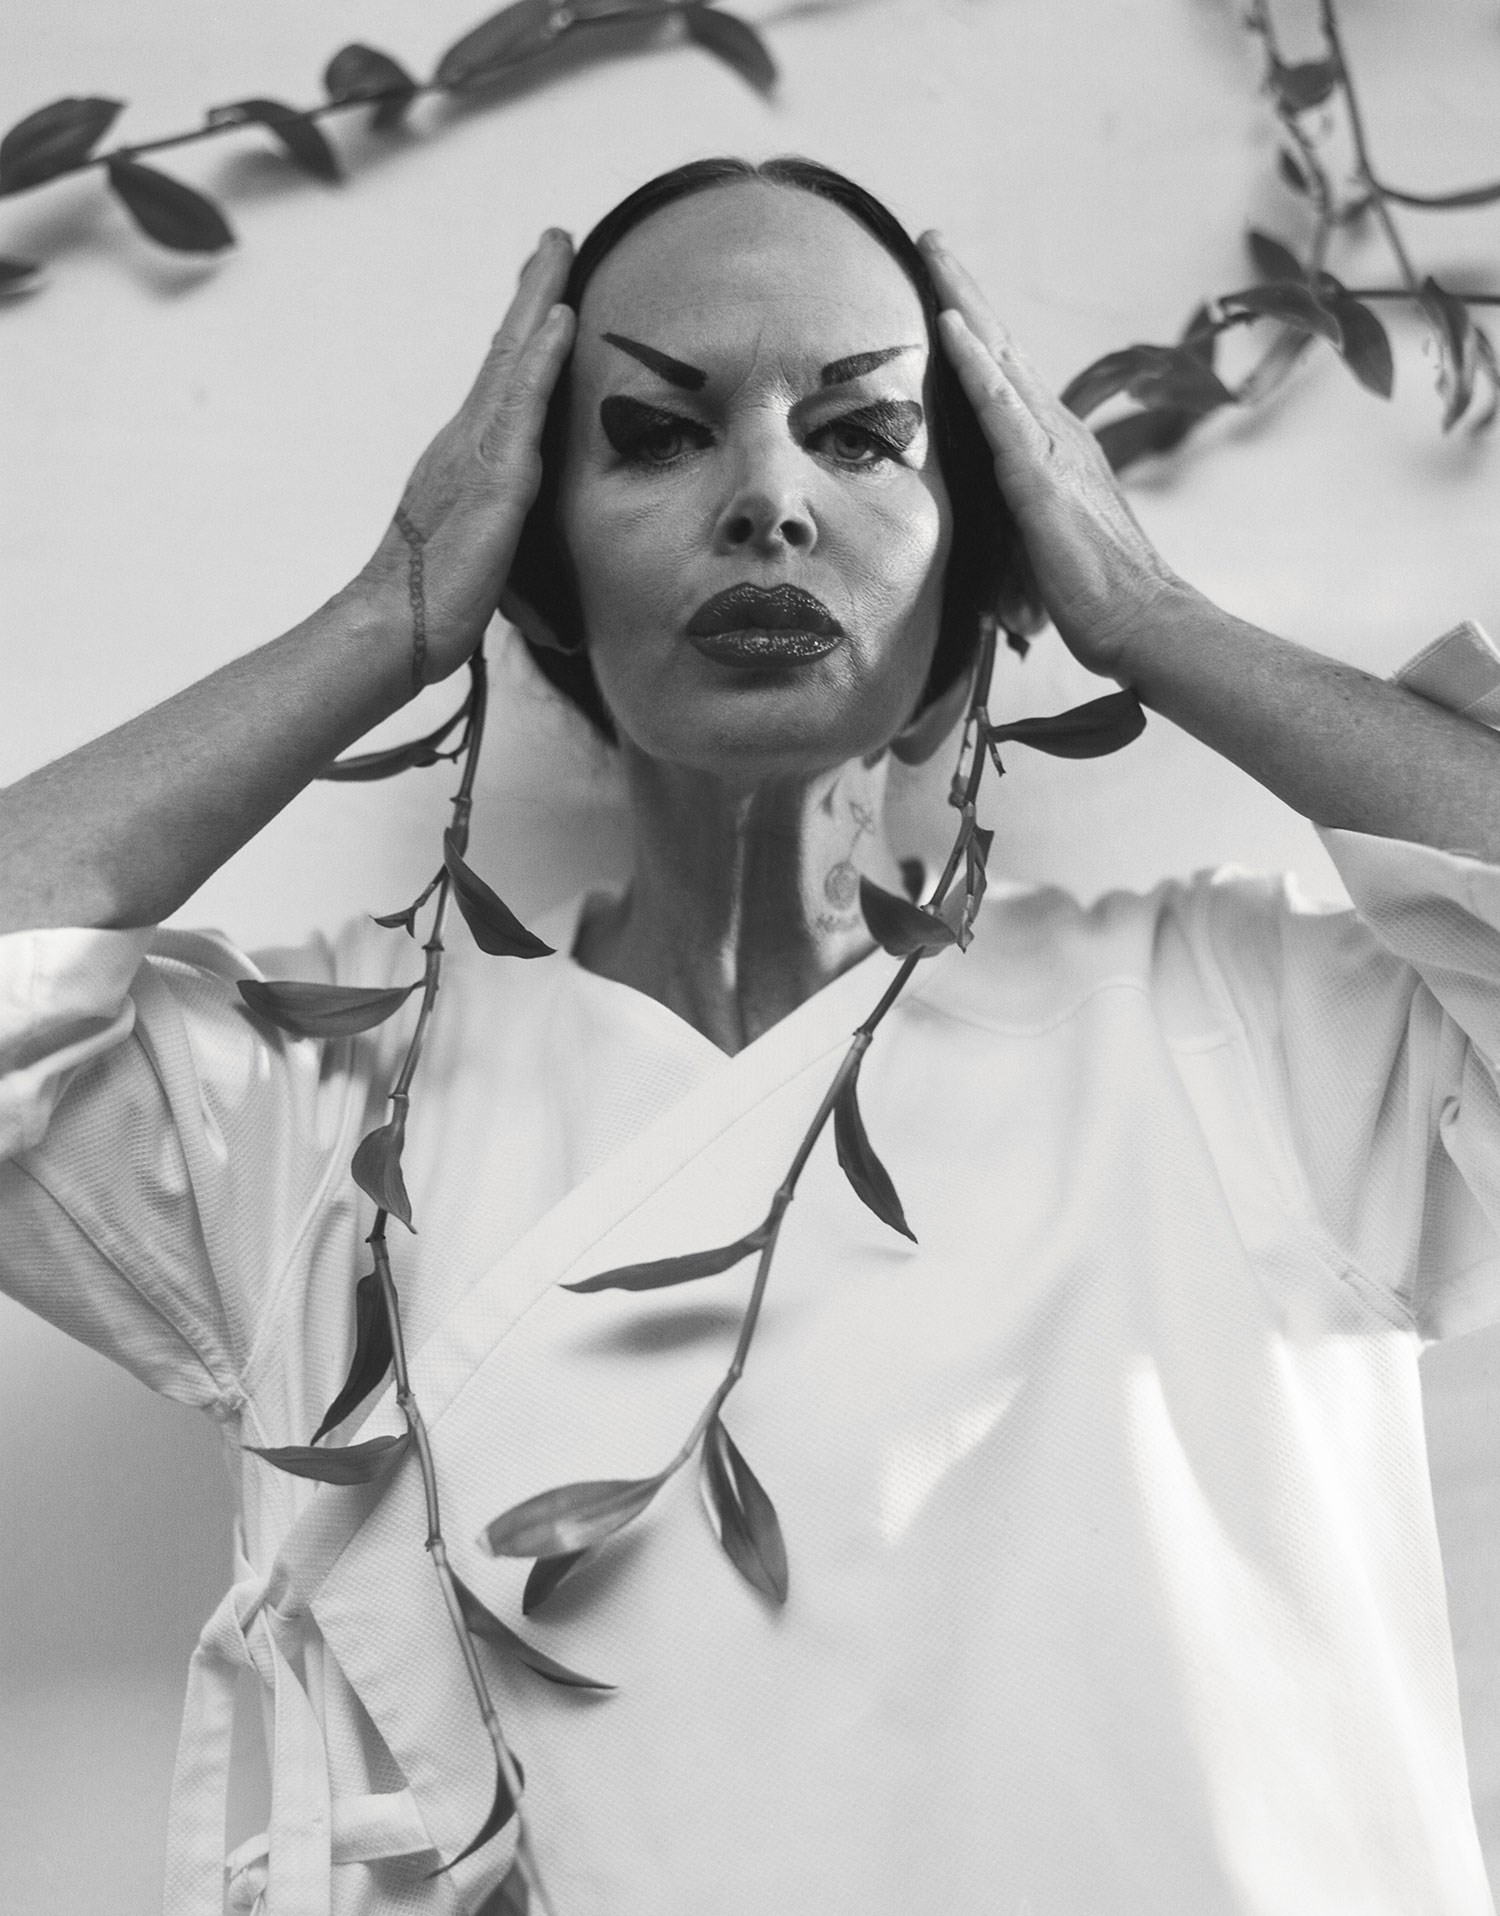 Performer Kembra Pfahler Wants Us All to Change the World | AnOther